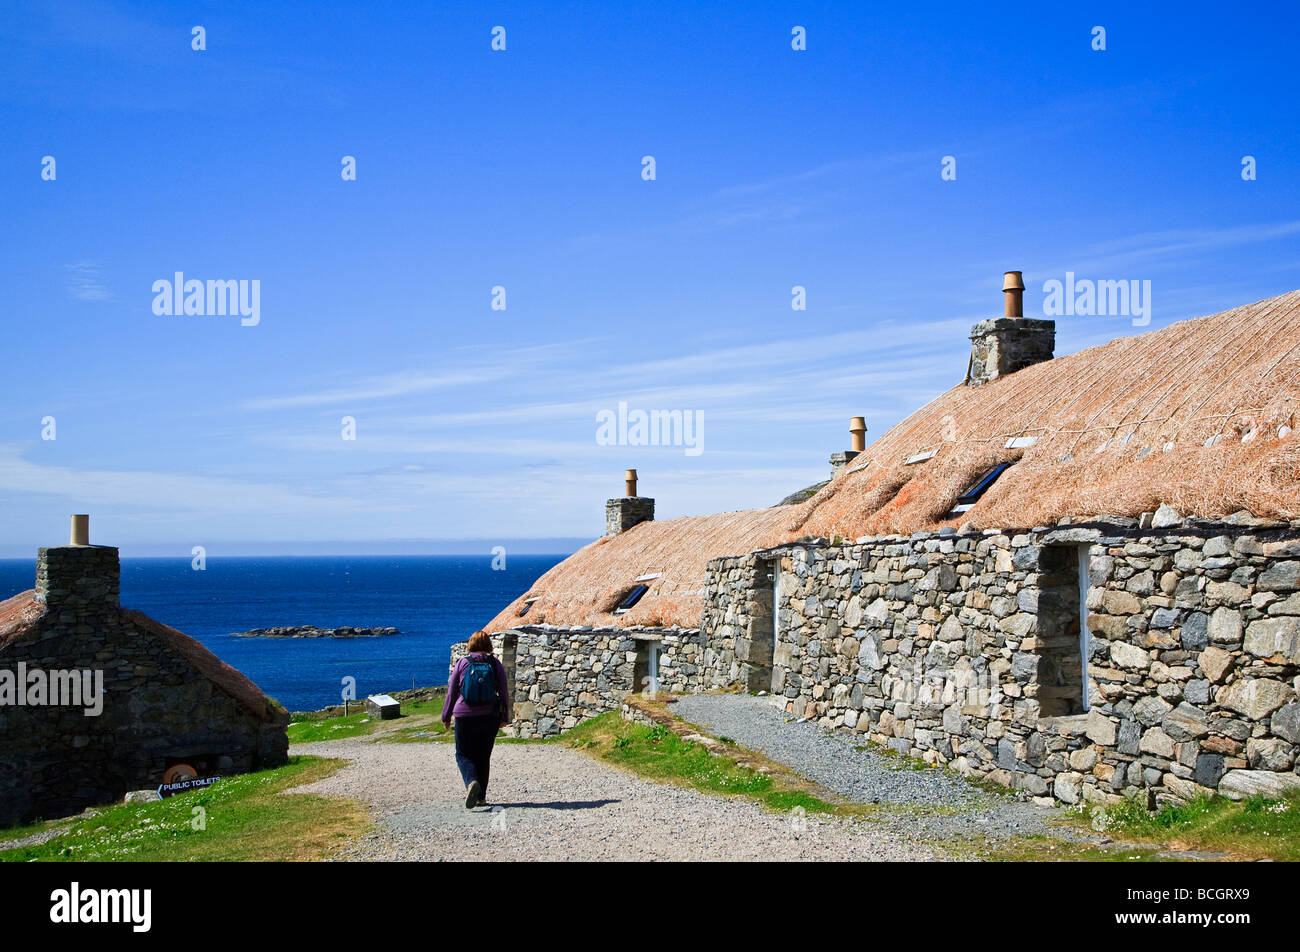 The Gearrannan Blackhouses Carloway Isle of Lewis, Outer Hebrides, western isles, Scotland, UK 2009 Stock Photo